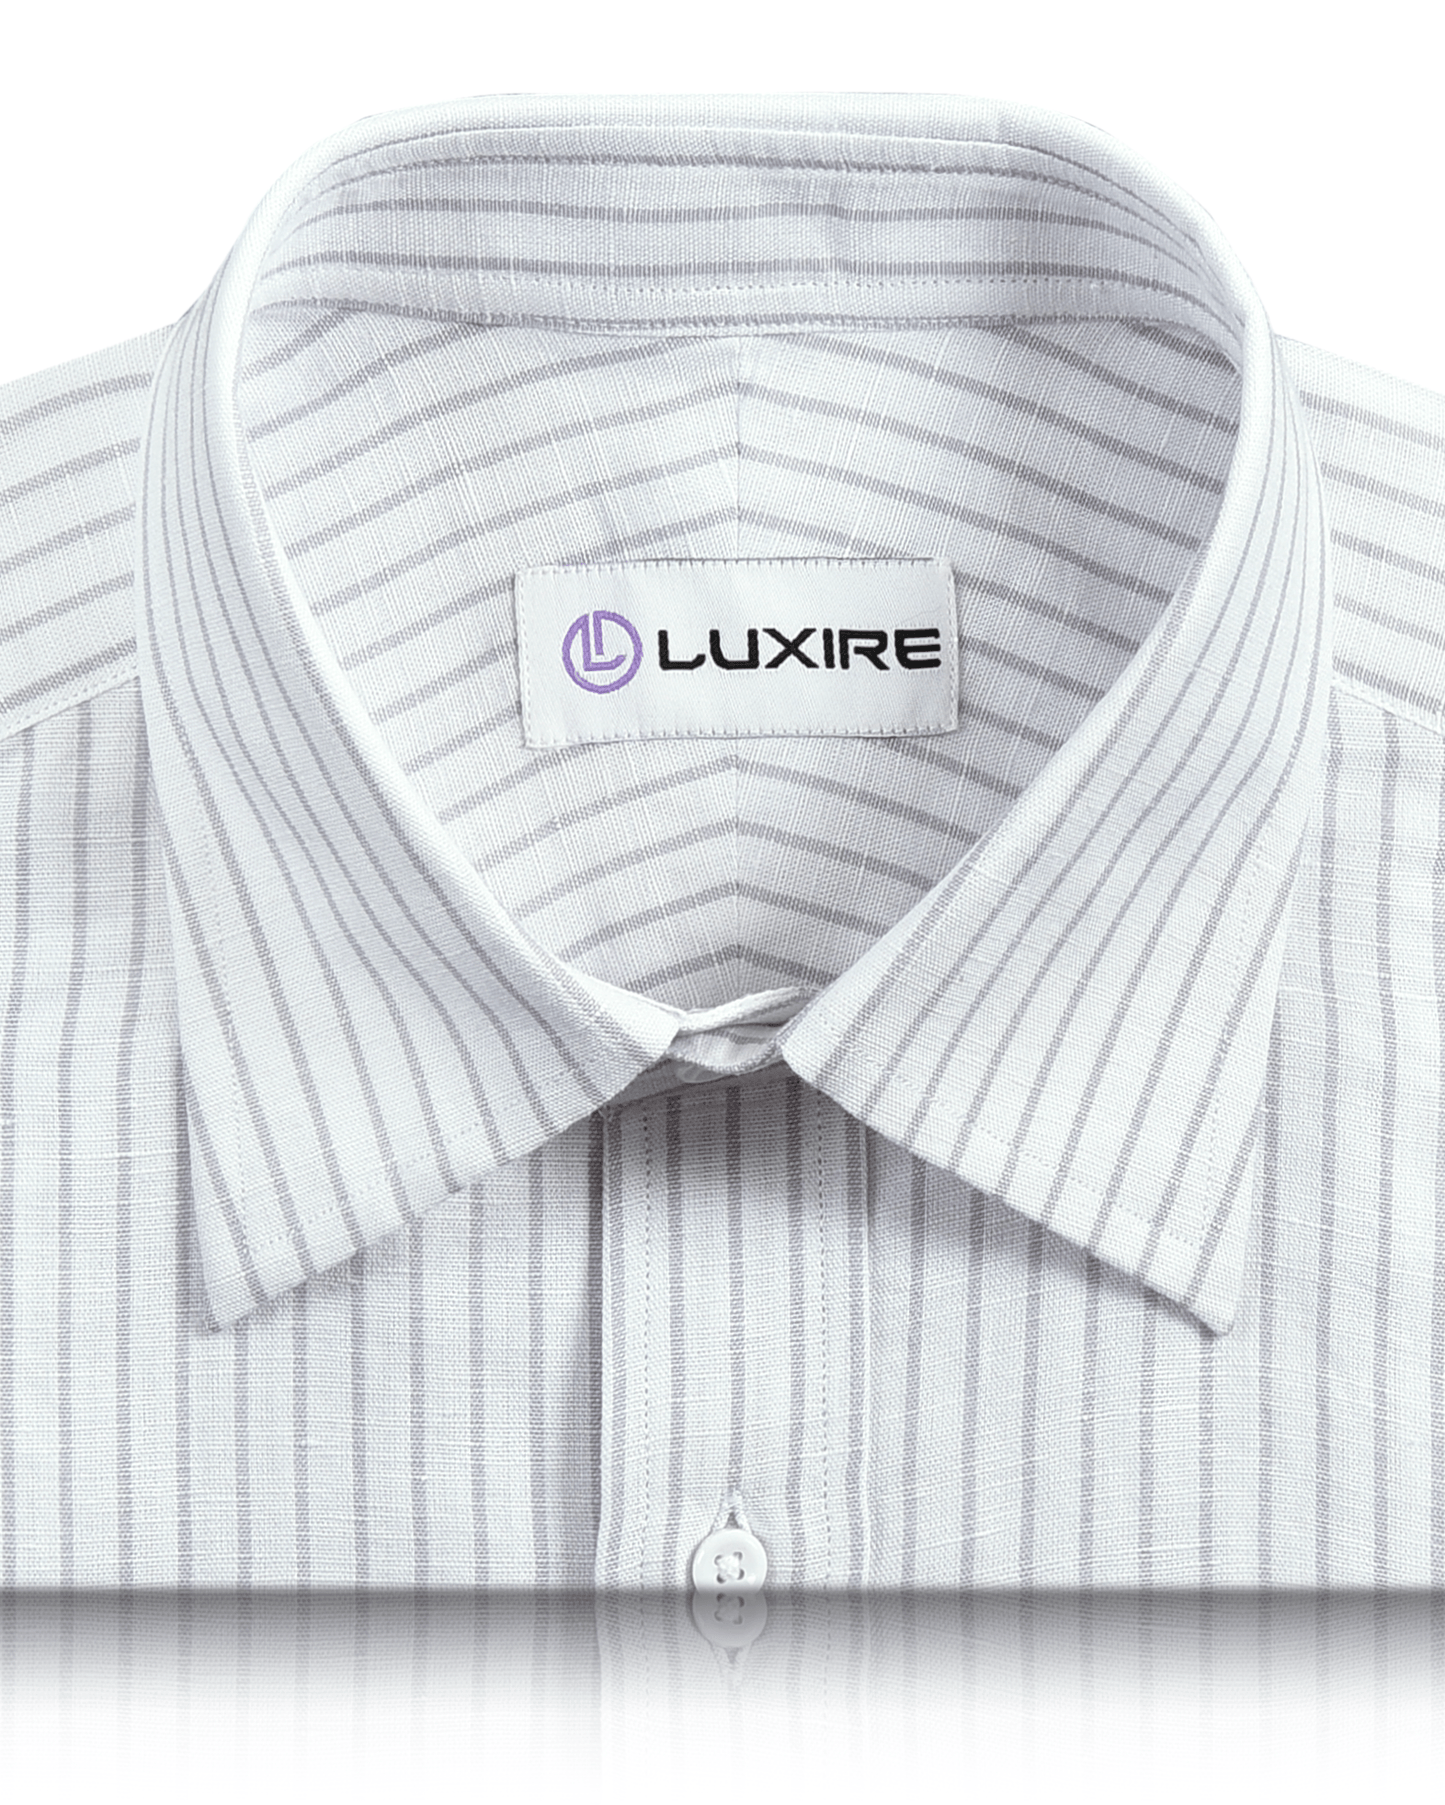 Collar of the custom linen shirt for men in white with grey candy stripes by Luxire Clothing